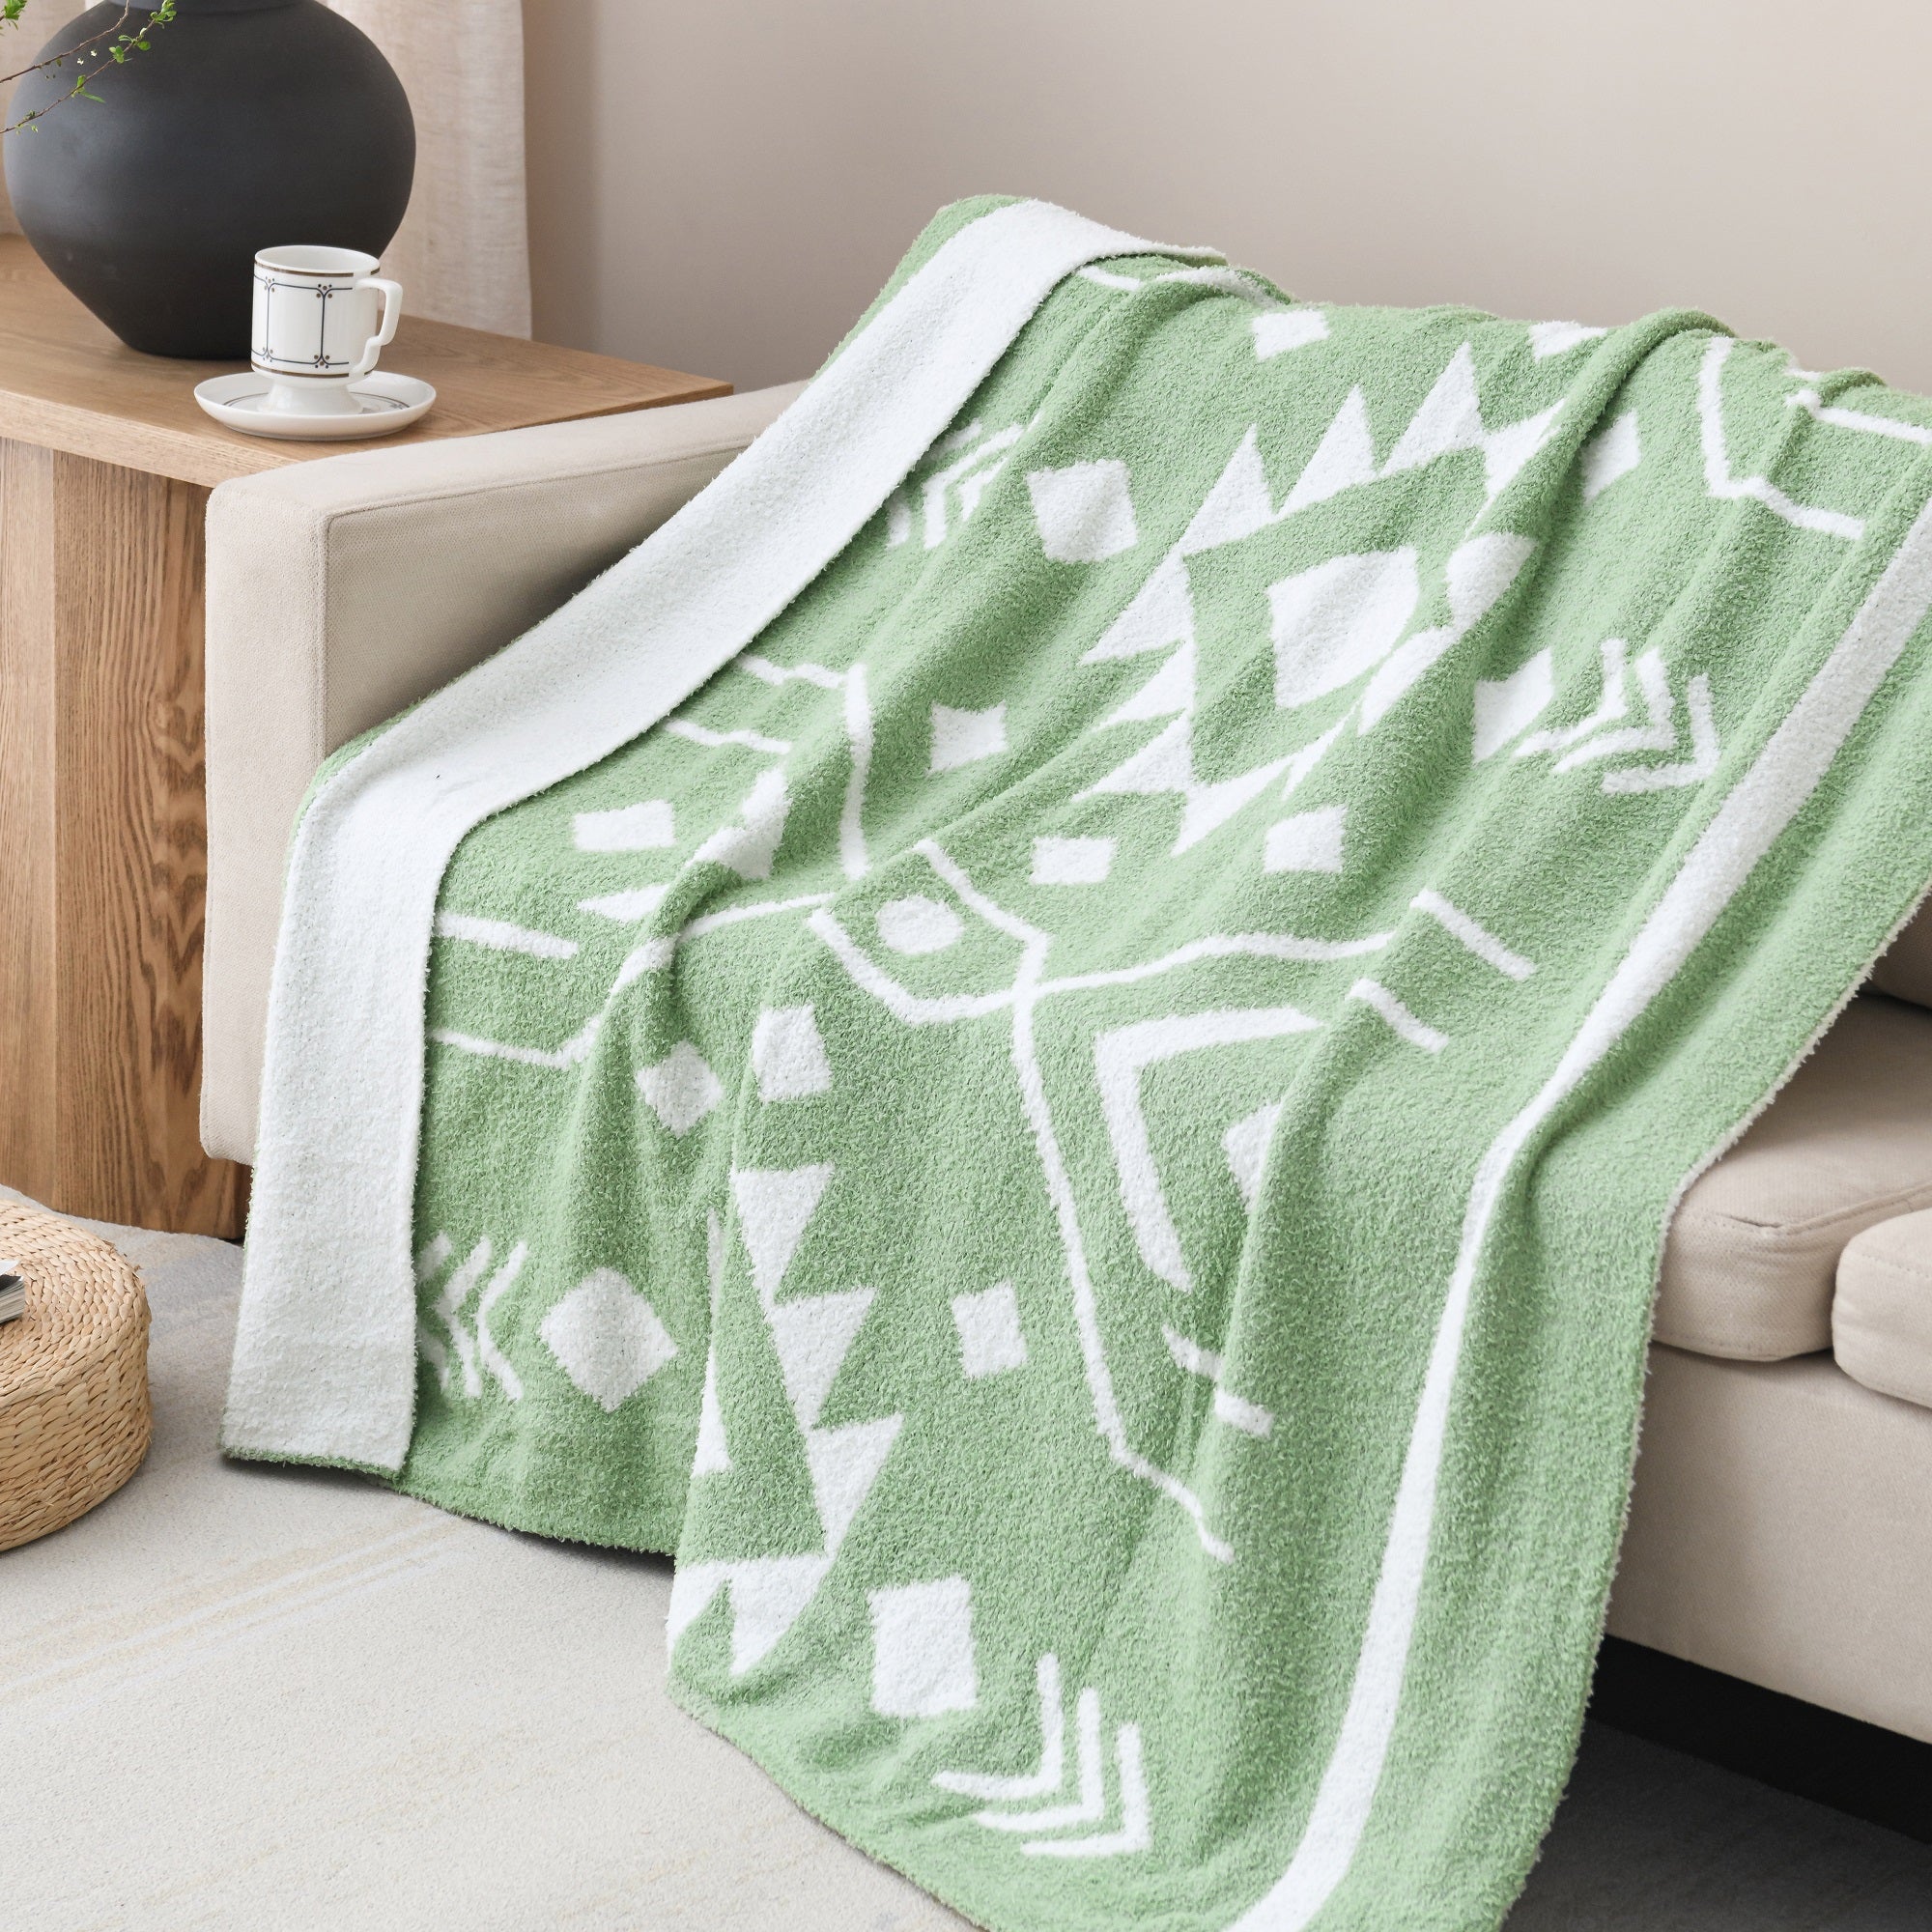 Jacquard Knit Throw Throw Blanket 50 x 60 inches Green